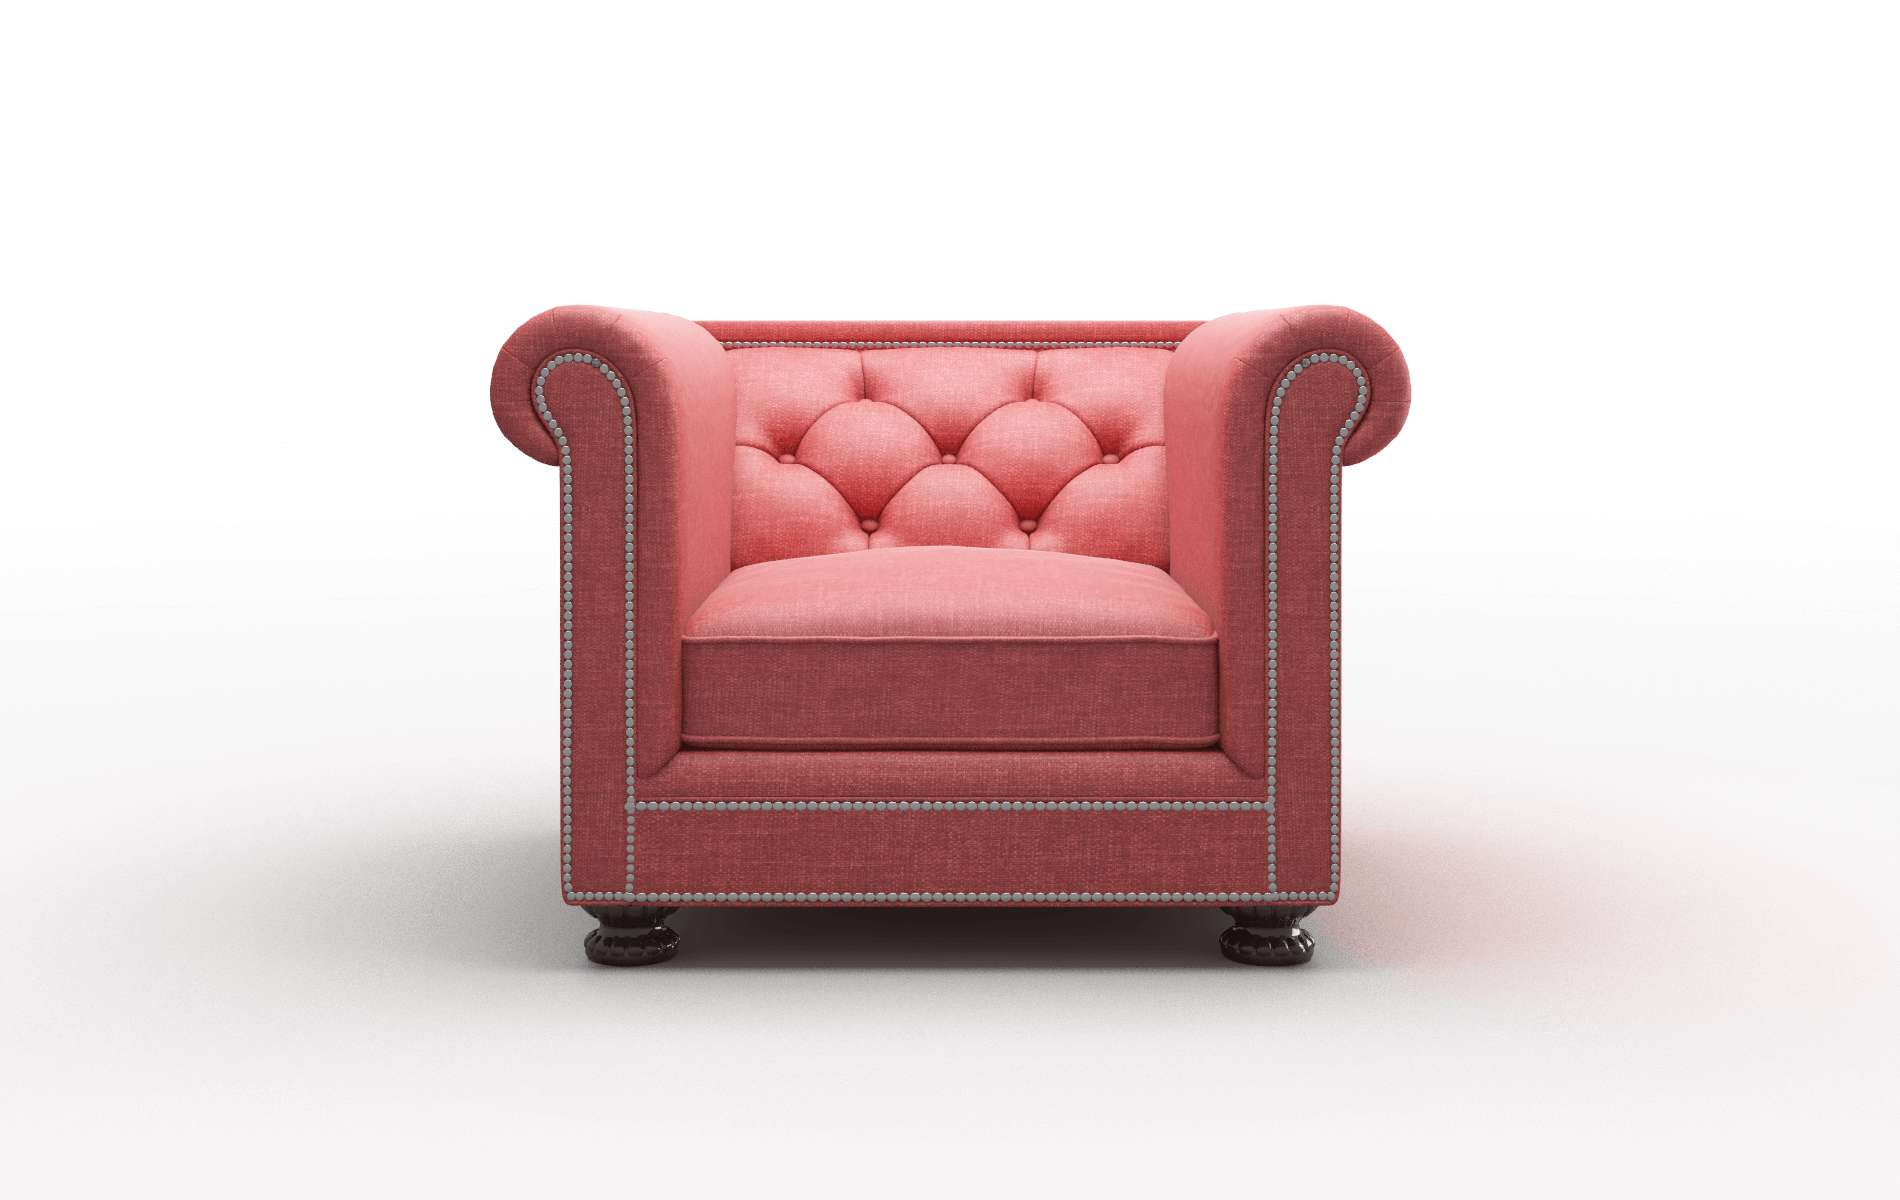 Athens Royale Berry chair espresso legs